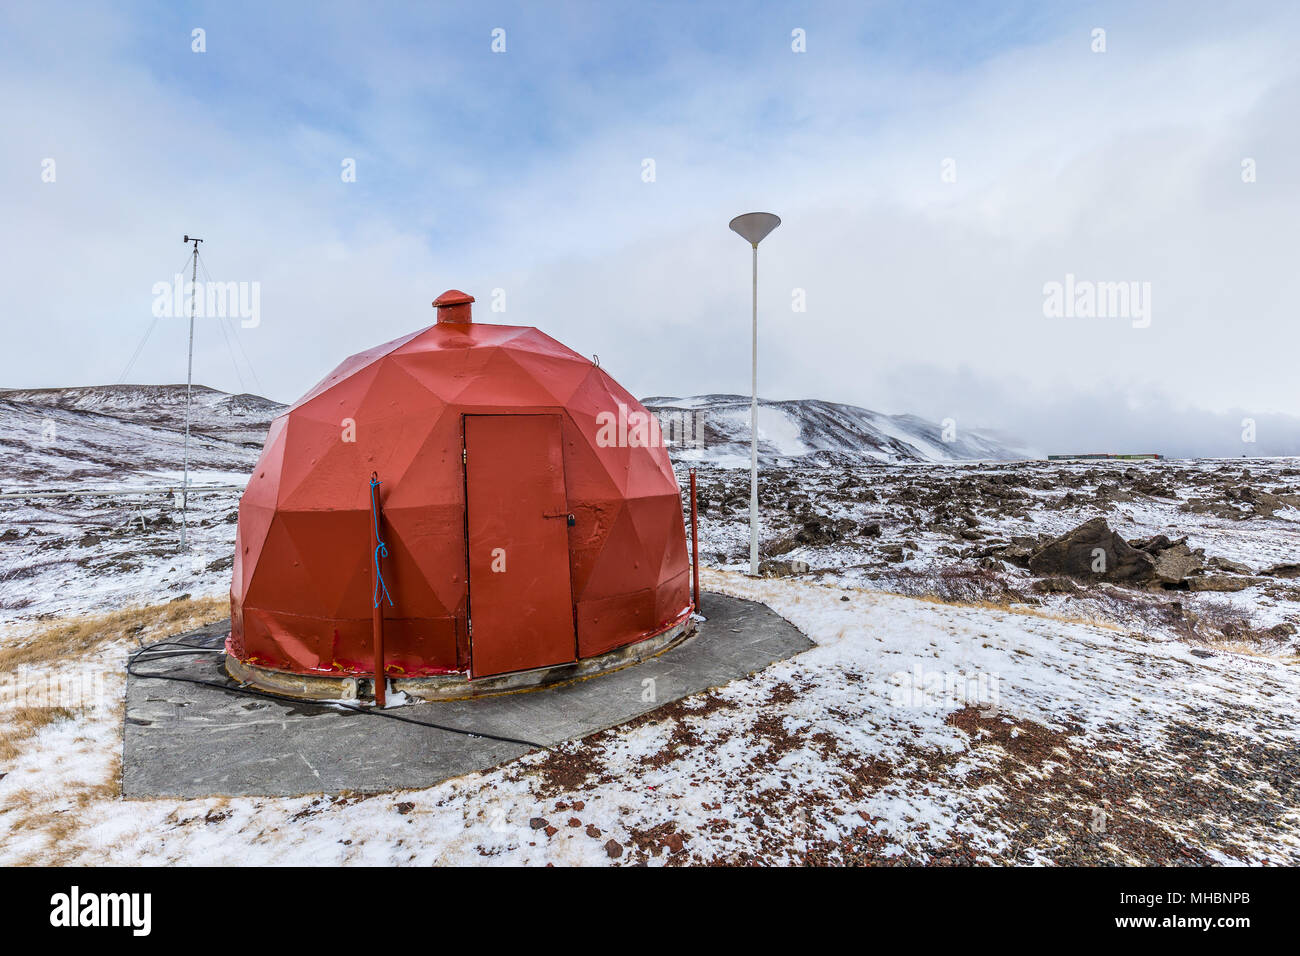 Red geodesic shed for technical equipment near the Krafla geothermal power plant at Lake Myvatn, Iceland Stock Photo